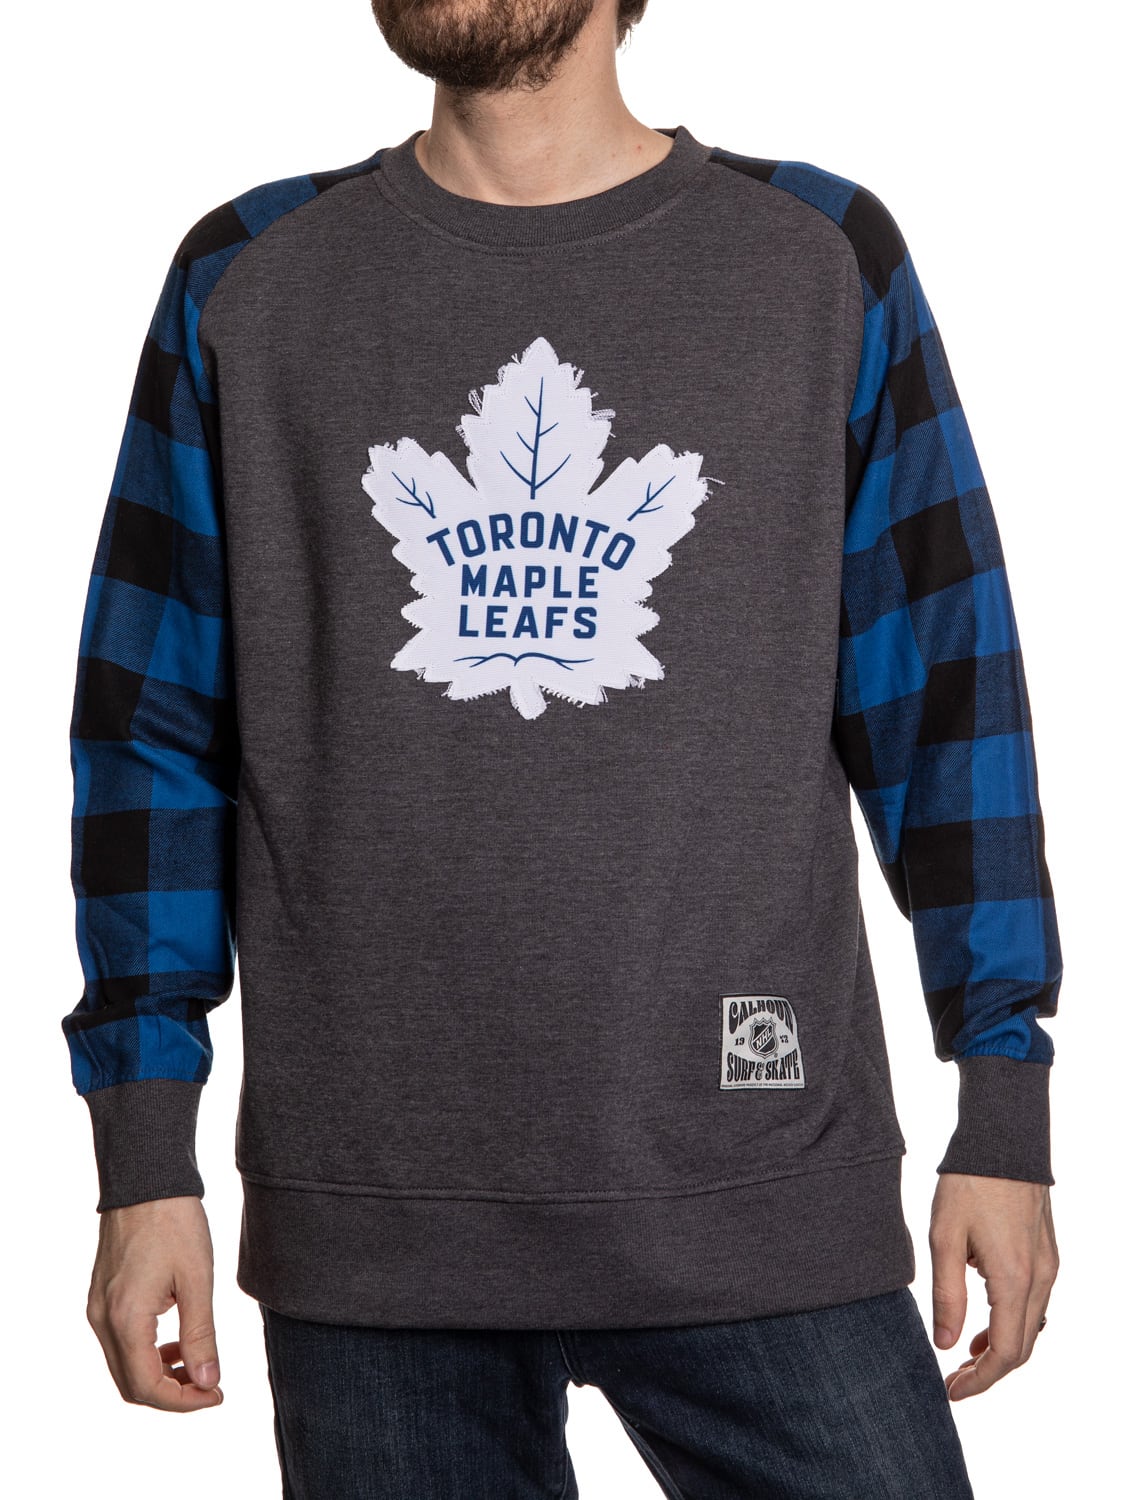 Toronto Maple Leafs Buffalo Plaid Long Sleeve Shirt With Blue Sleeves Front View